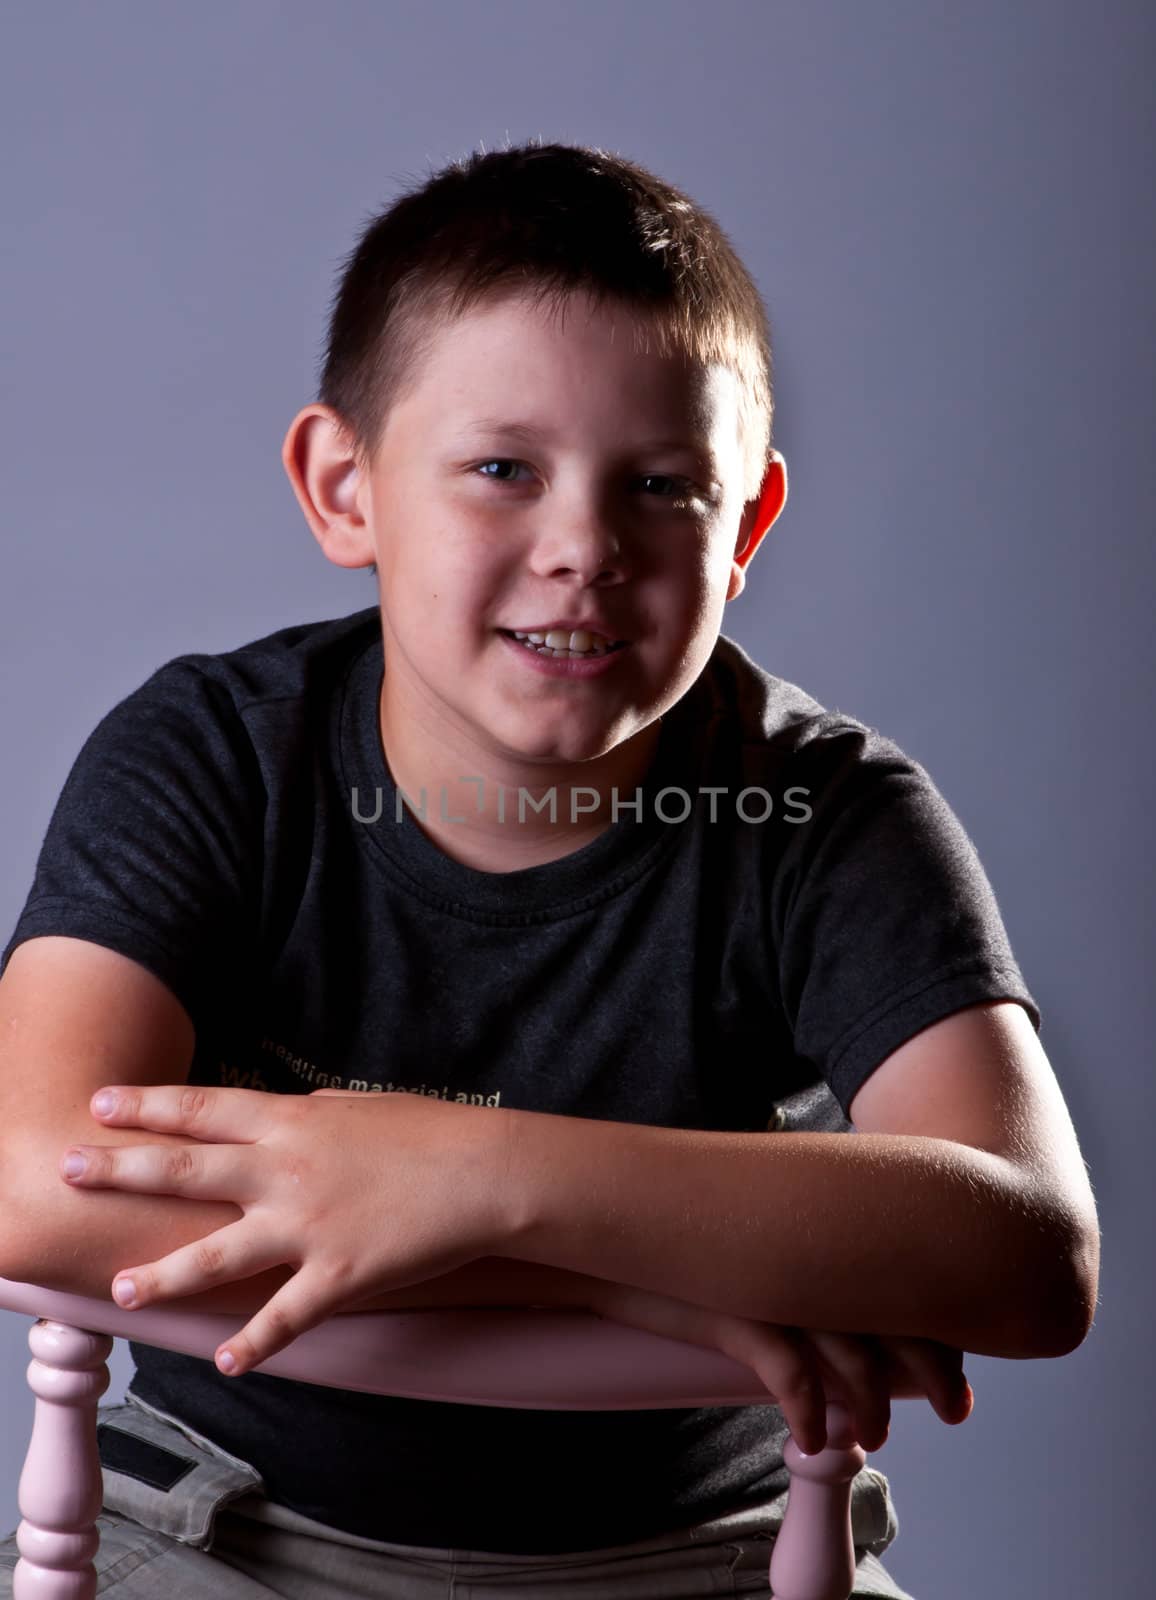 Young boy. Portrait in studio on a grey background.